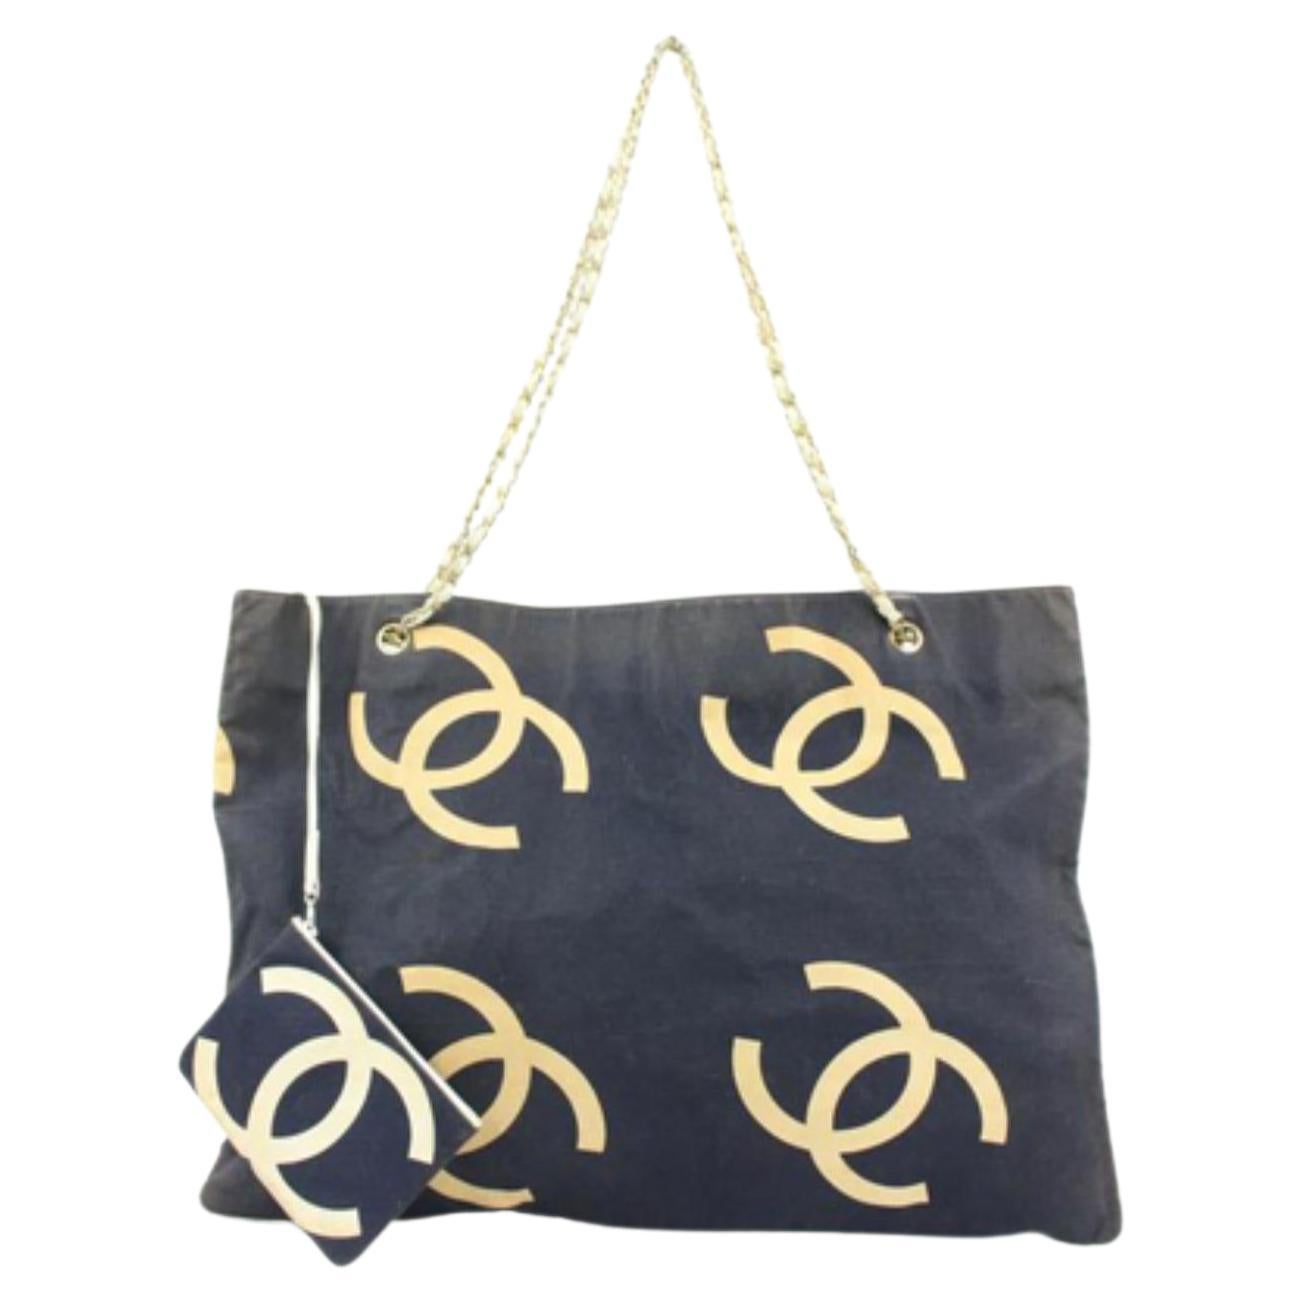 Chanel Navy x Beige Jumbo CC Chain Tote with Pouch 66c23s For